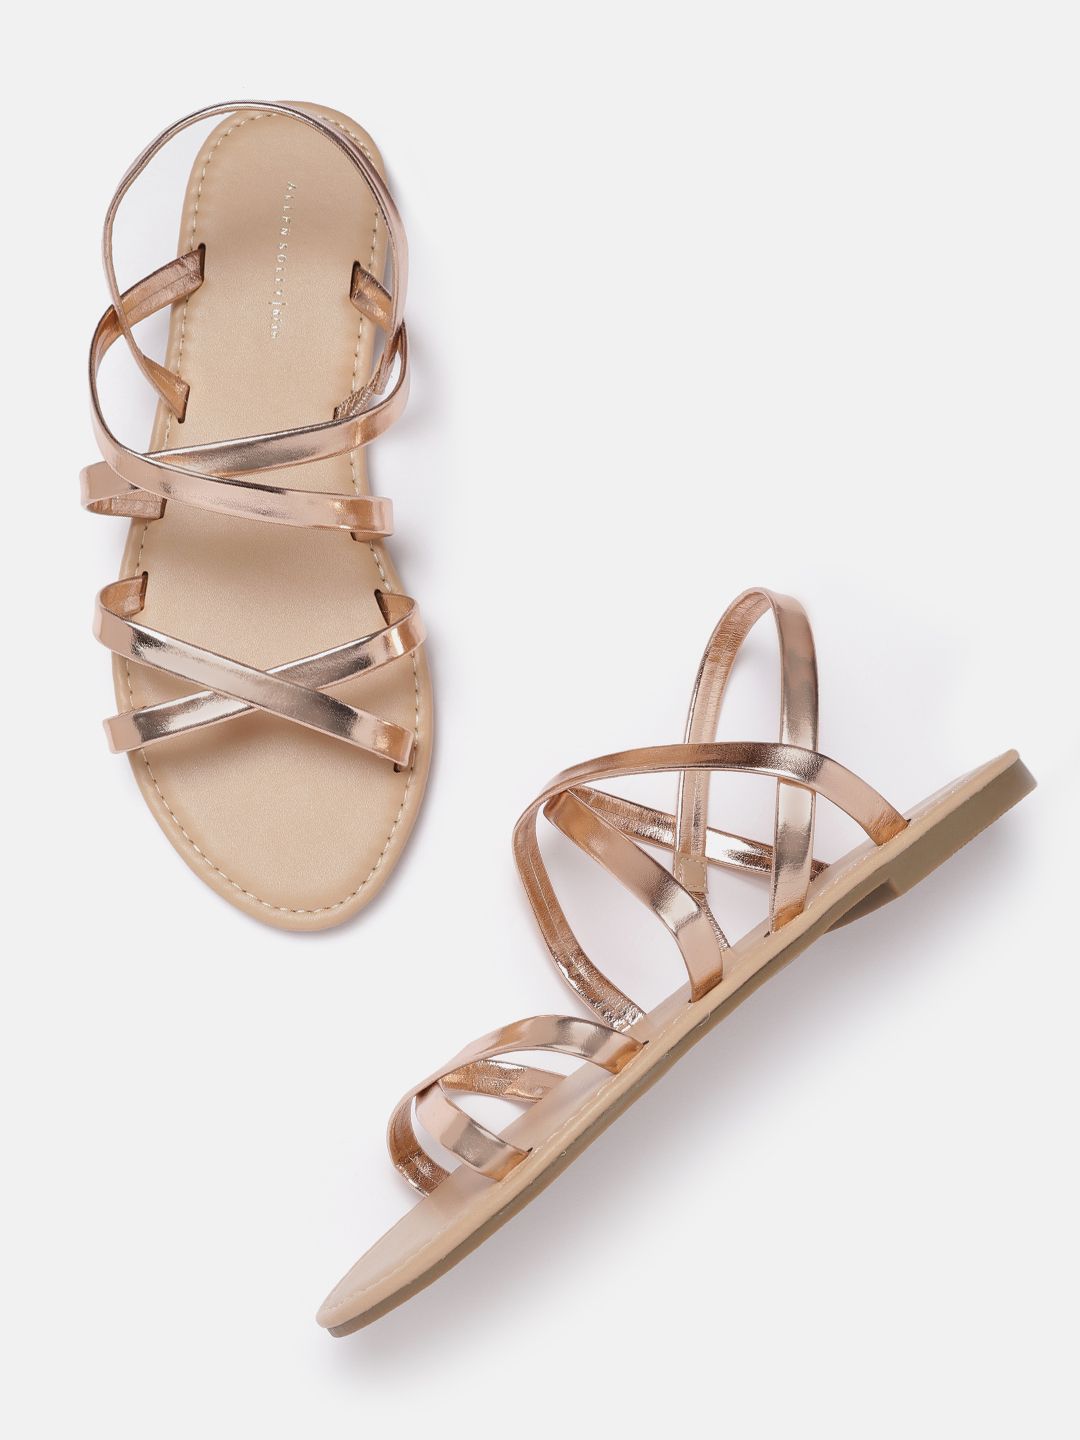 Allen Solly Women Rose Gold-Toned Strappy Open Toe Flats Price in India